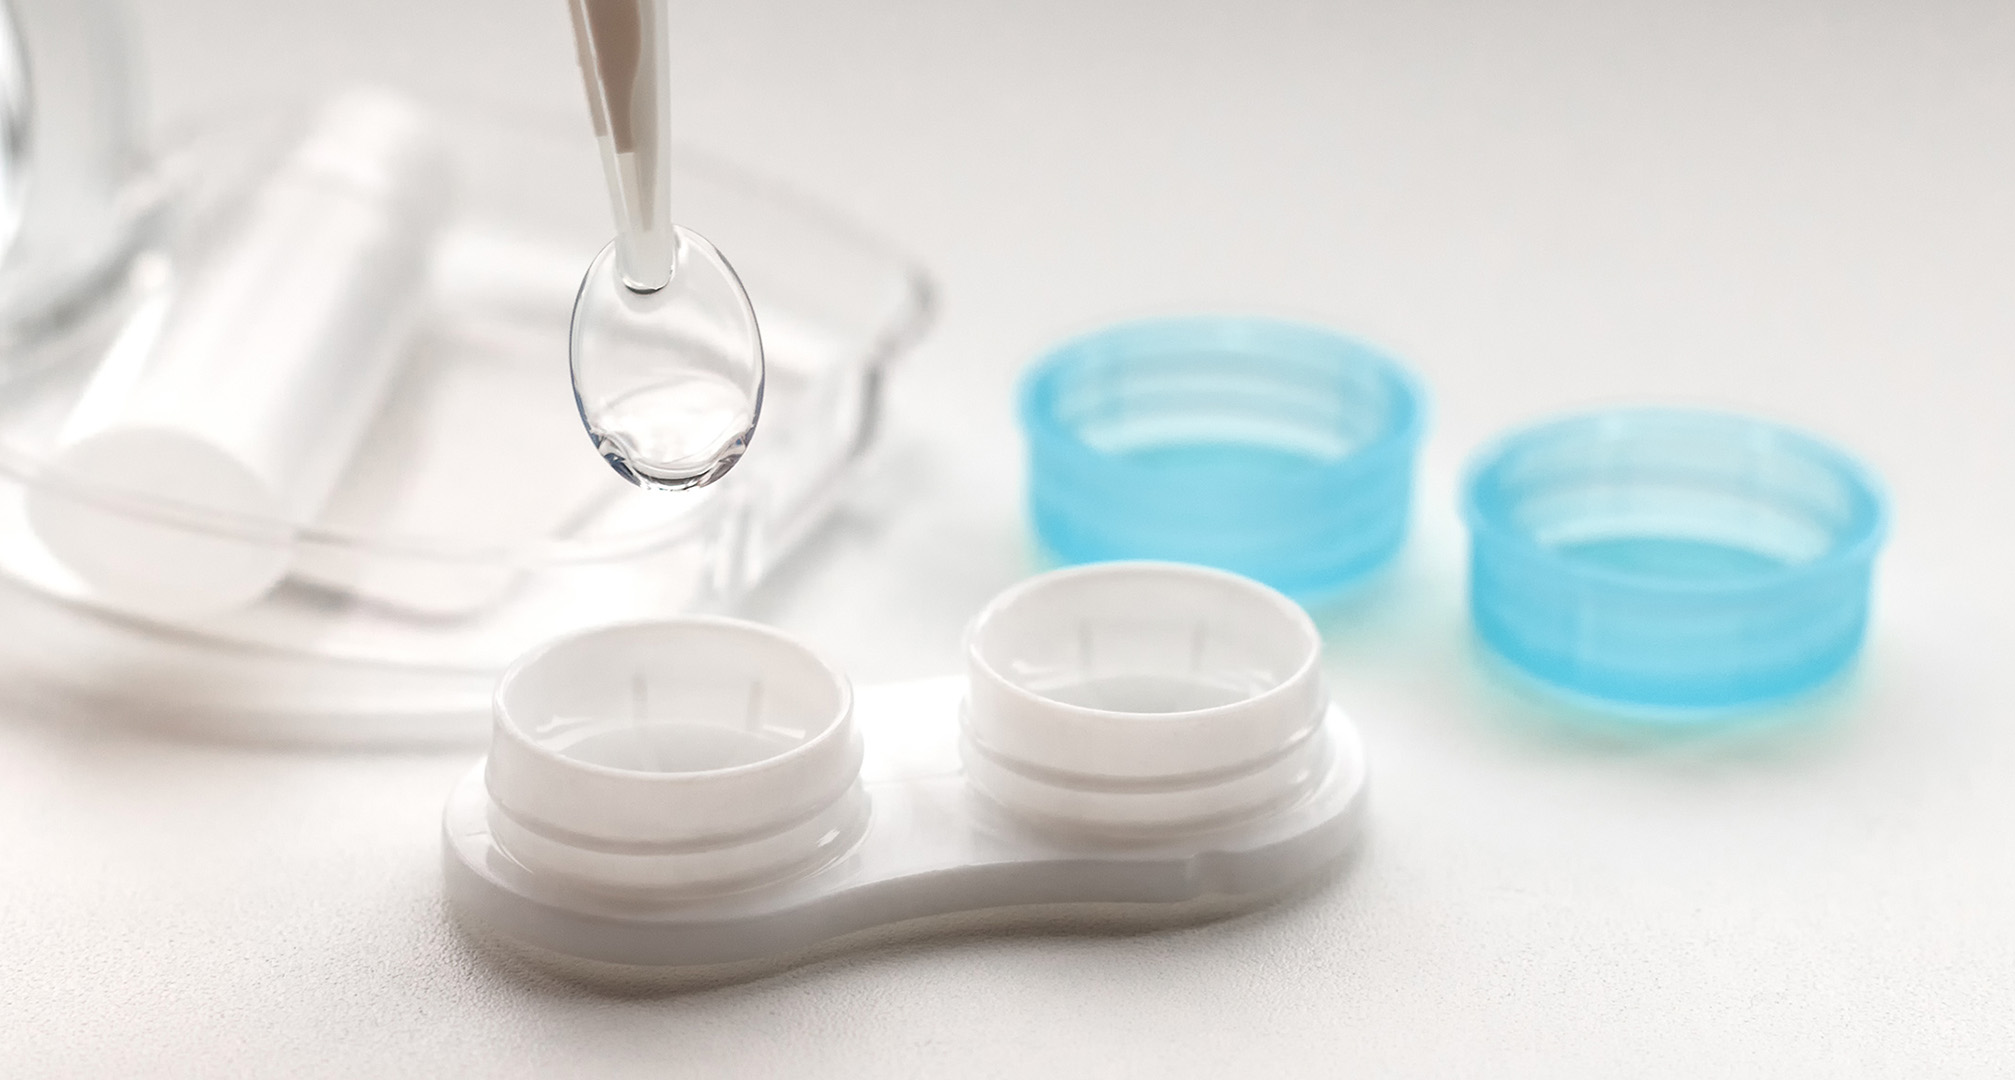 contact lens case and one contact lens on white table